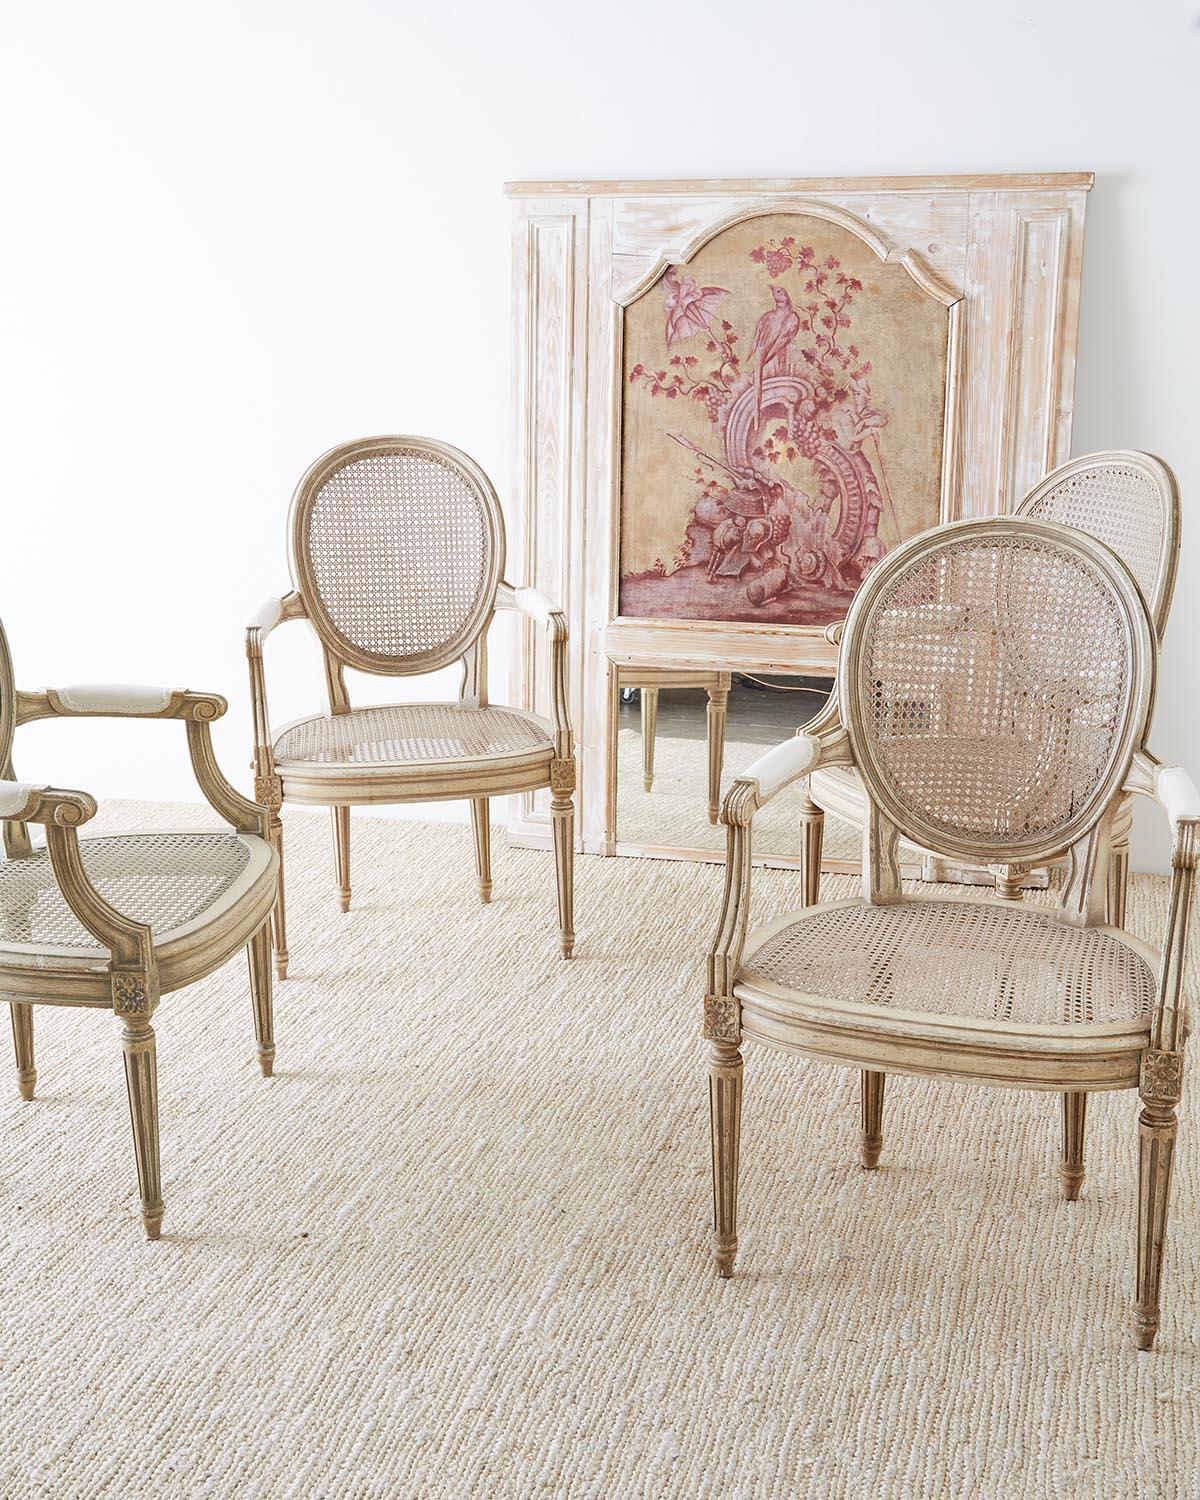 Elegant set of four French Louis XVI style dining chairs of armchairs. Featuring a hand caned seat and back with a lacquered frame in the Gustavian taste. Beautifully carved with round backs and molded arms attached to a bow front seat with